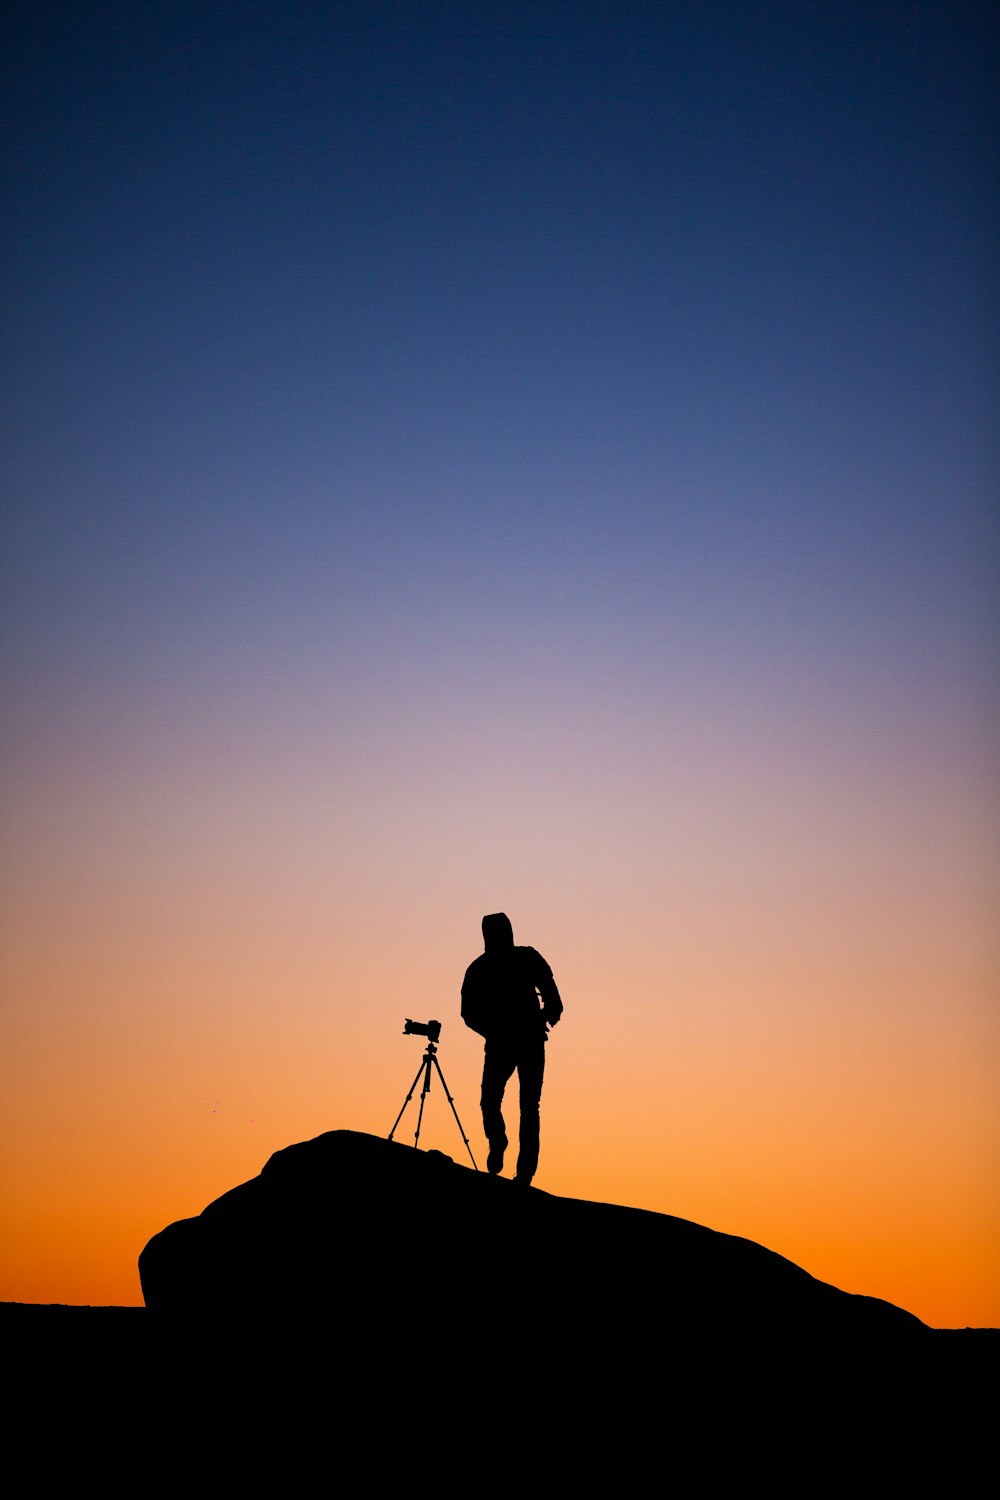 silhouette of person standing beside DSLR camera with stand at sunset